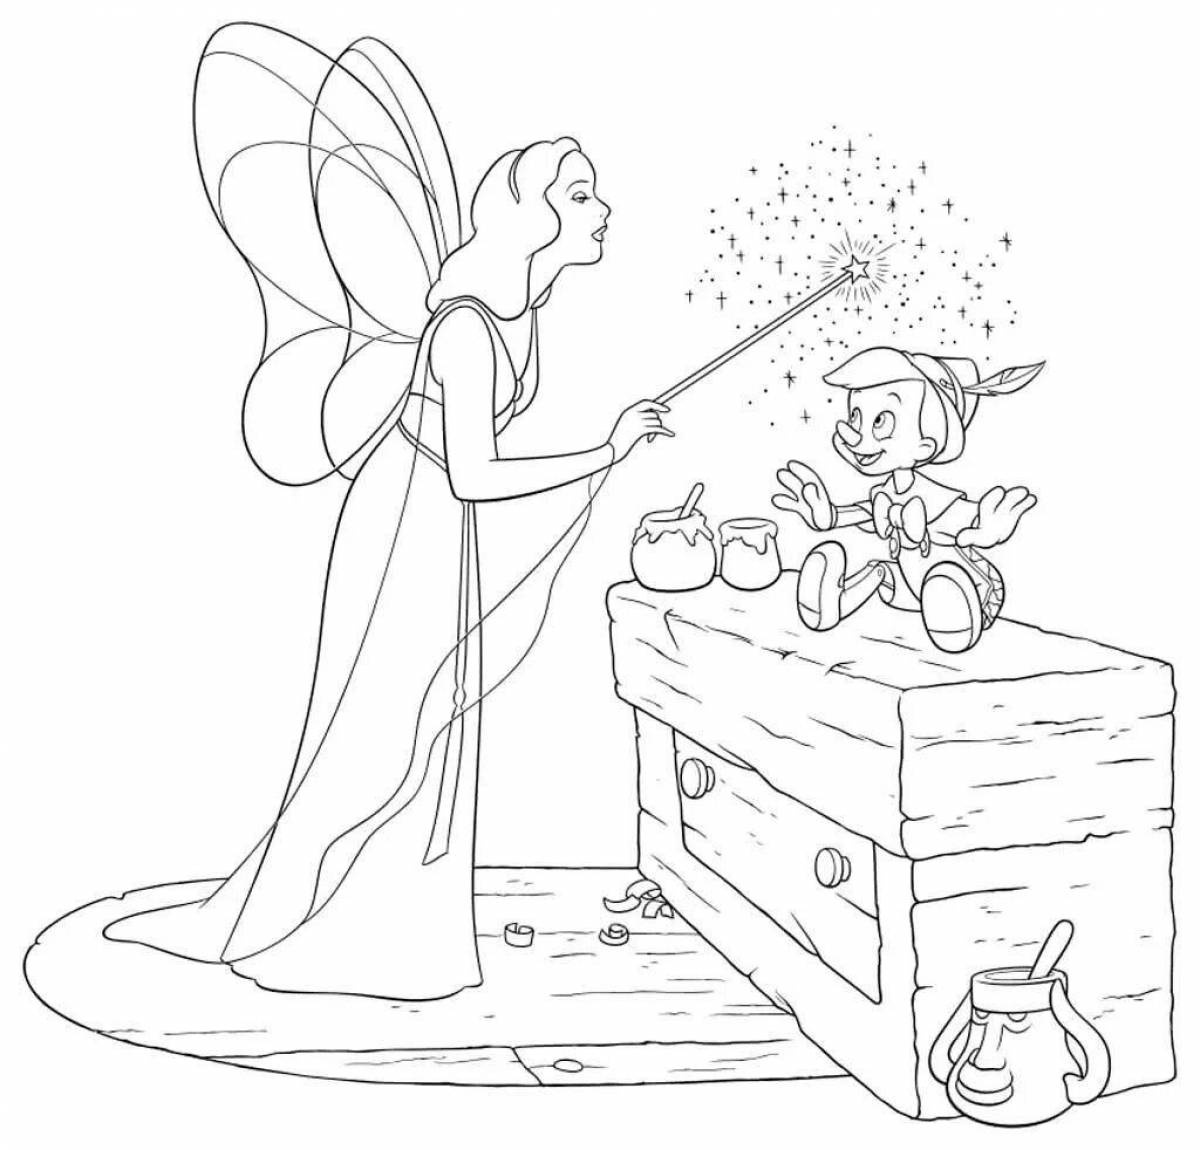 Coloring page spectacular sorceress